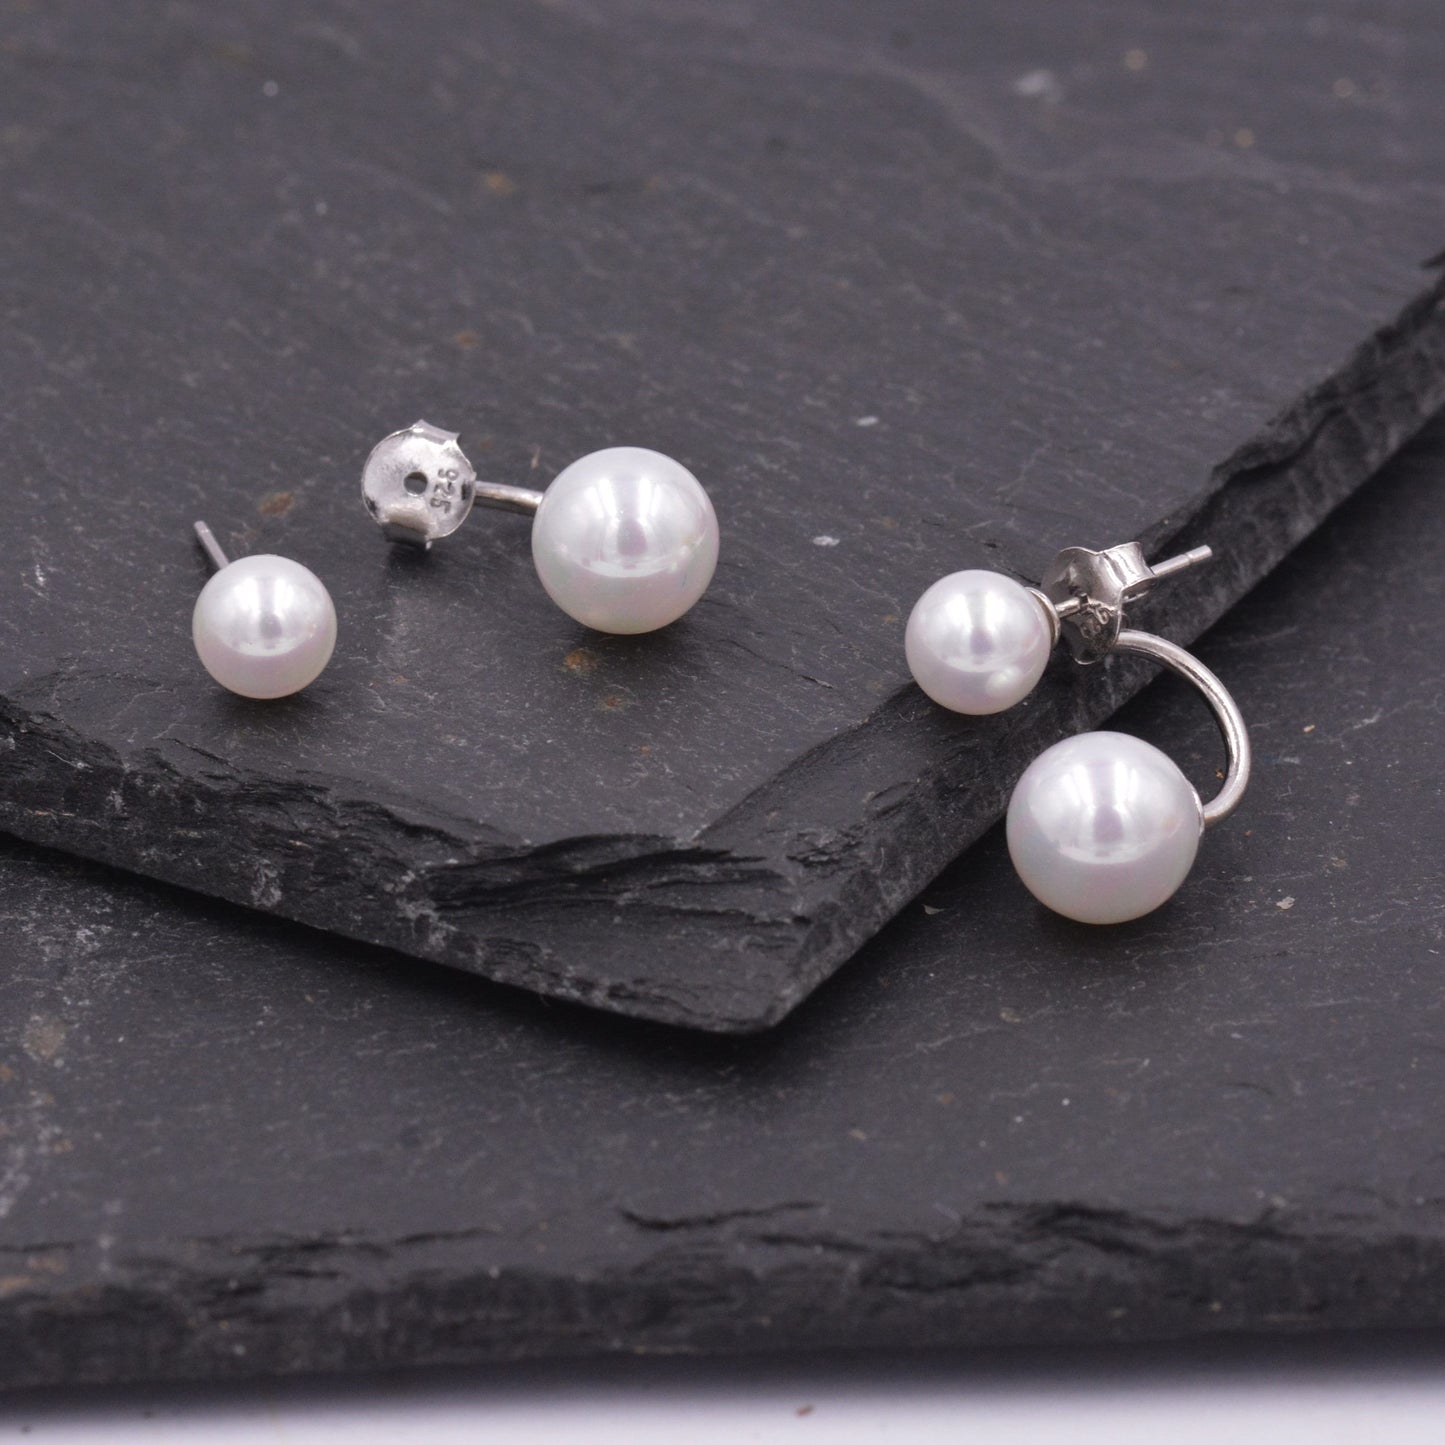 Sterling Silver Front and Back Stud Earrings Ear Jackets with Simulated Pearls, Simple and Elegant, Mother of Pearl Ear Jacket